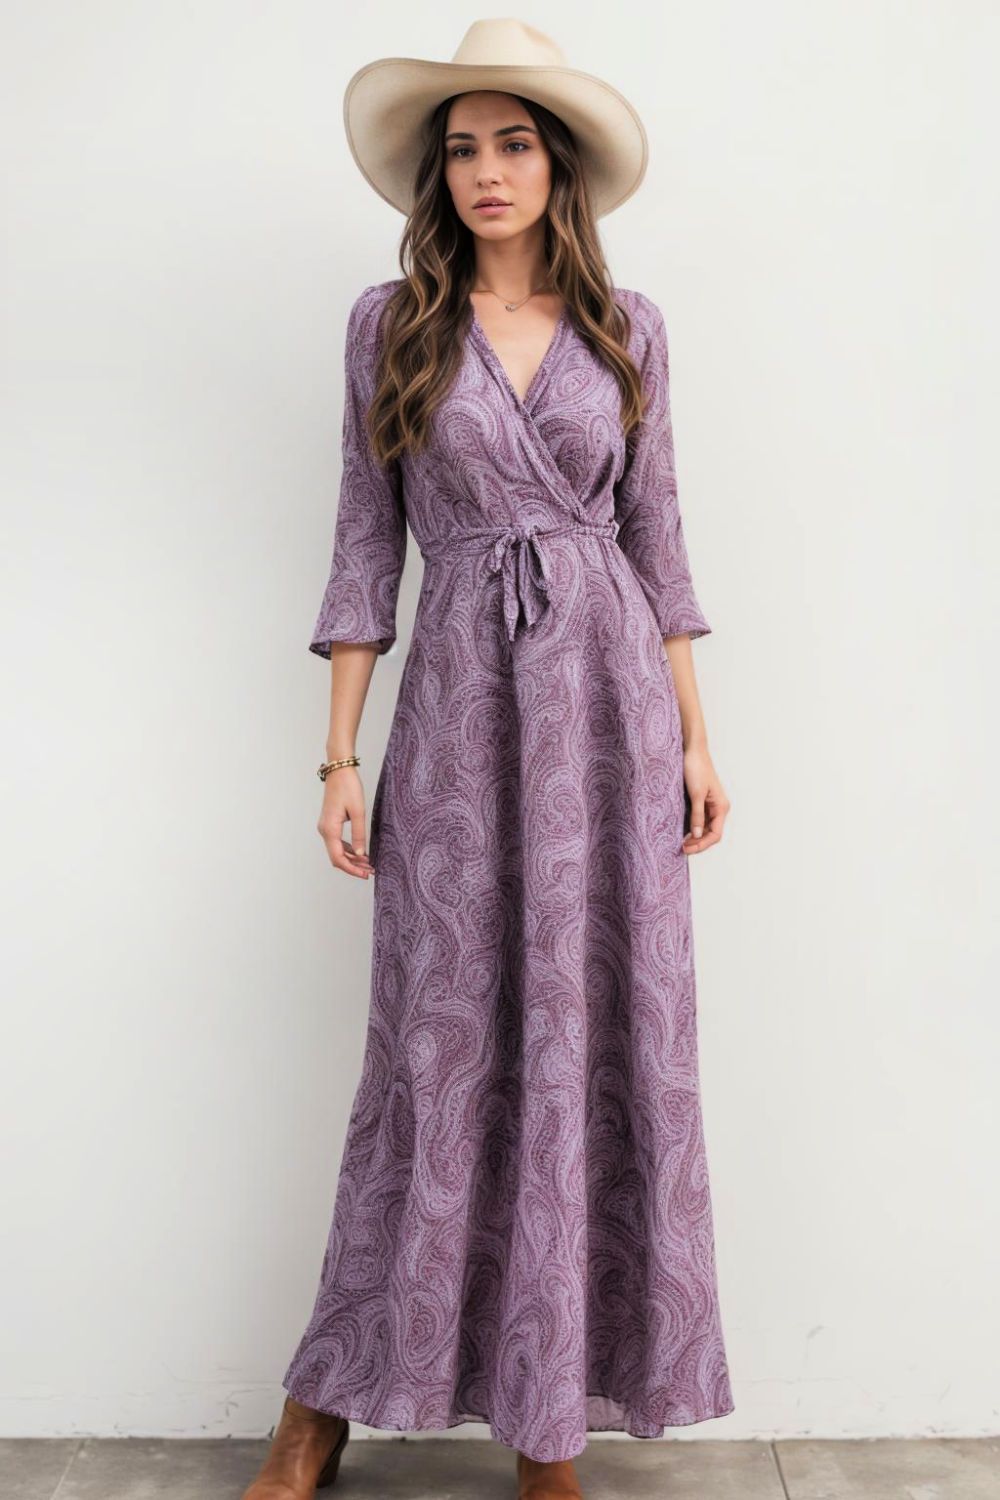 paisley print maxi dress for cowgirl